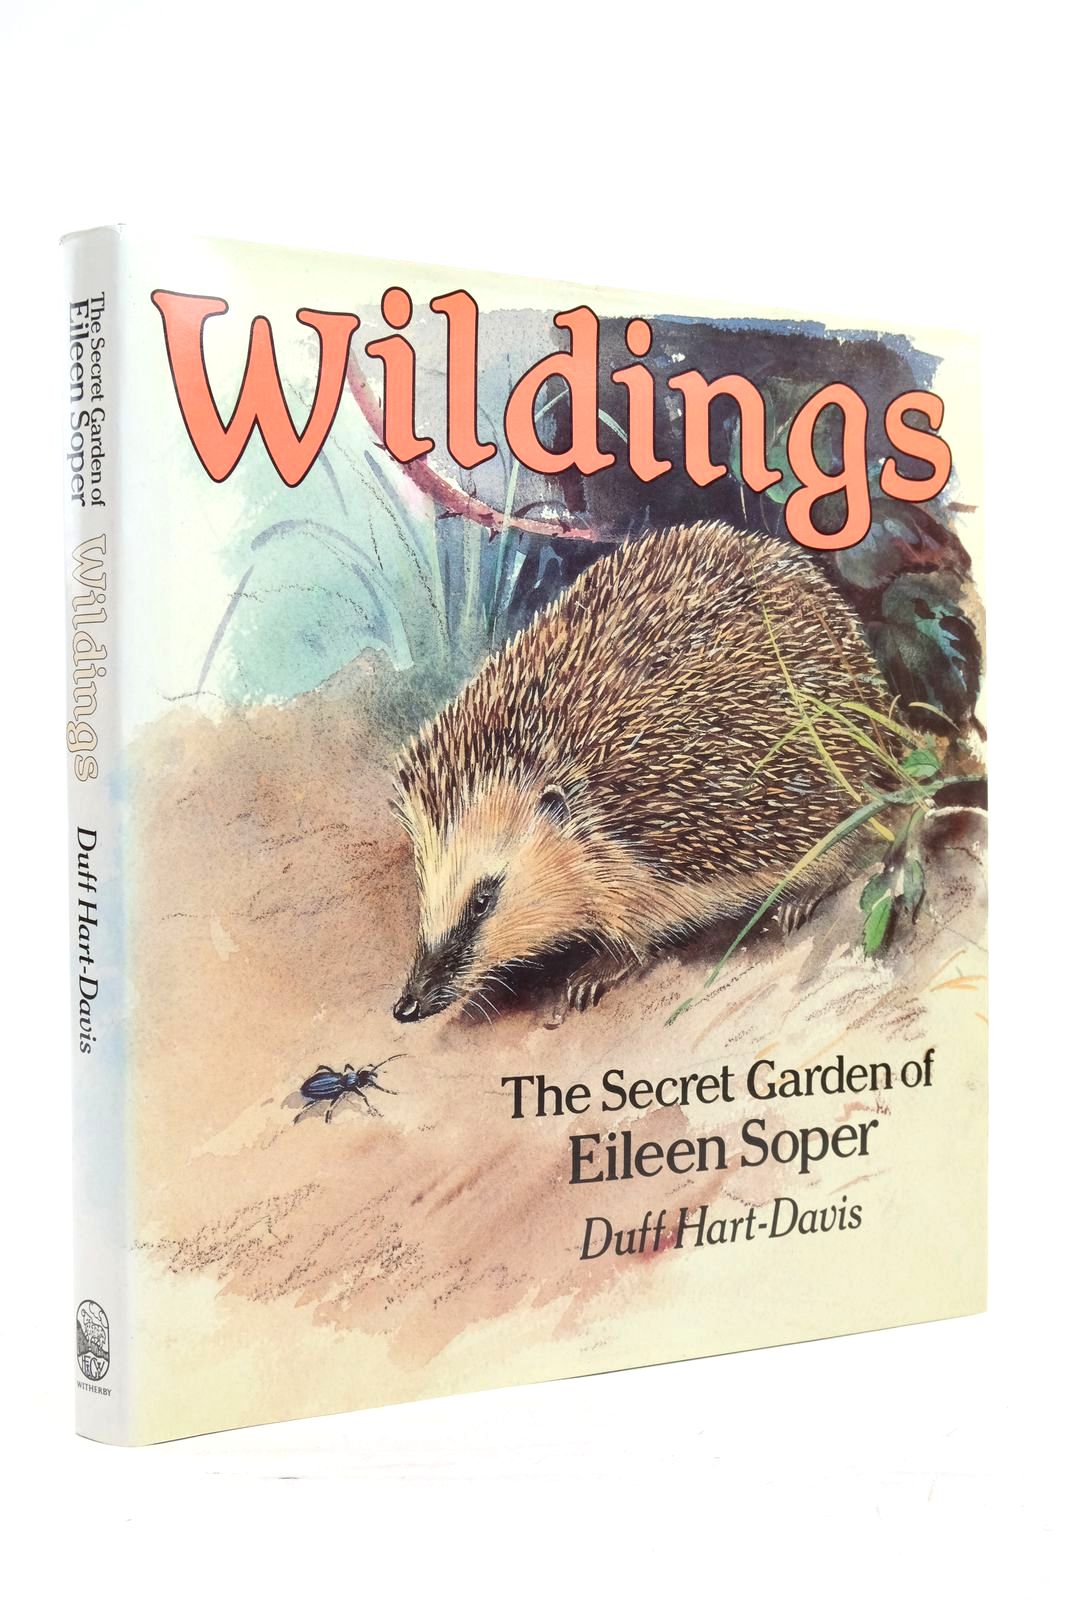 Photo of WILDINGS THE SECRET GARDEN OF EILEEN SOPER written by Hart-Davis, Duff illustrated by Soper, Eileen published by H.F. &amp; G. Witherby Ltd. (STOCK CODE: 2137117)  for sale by Stella & Rose's Books